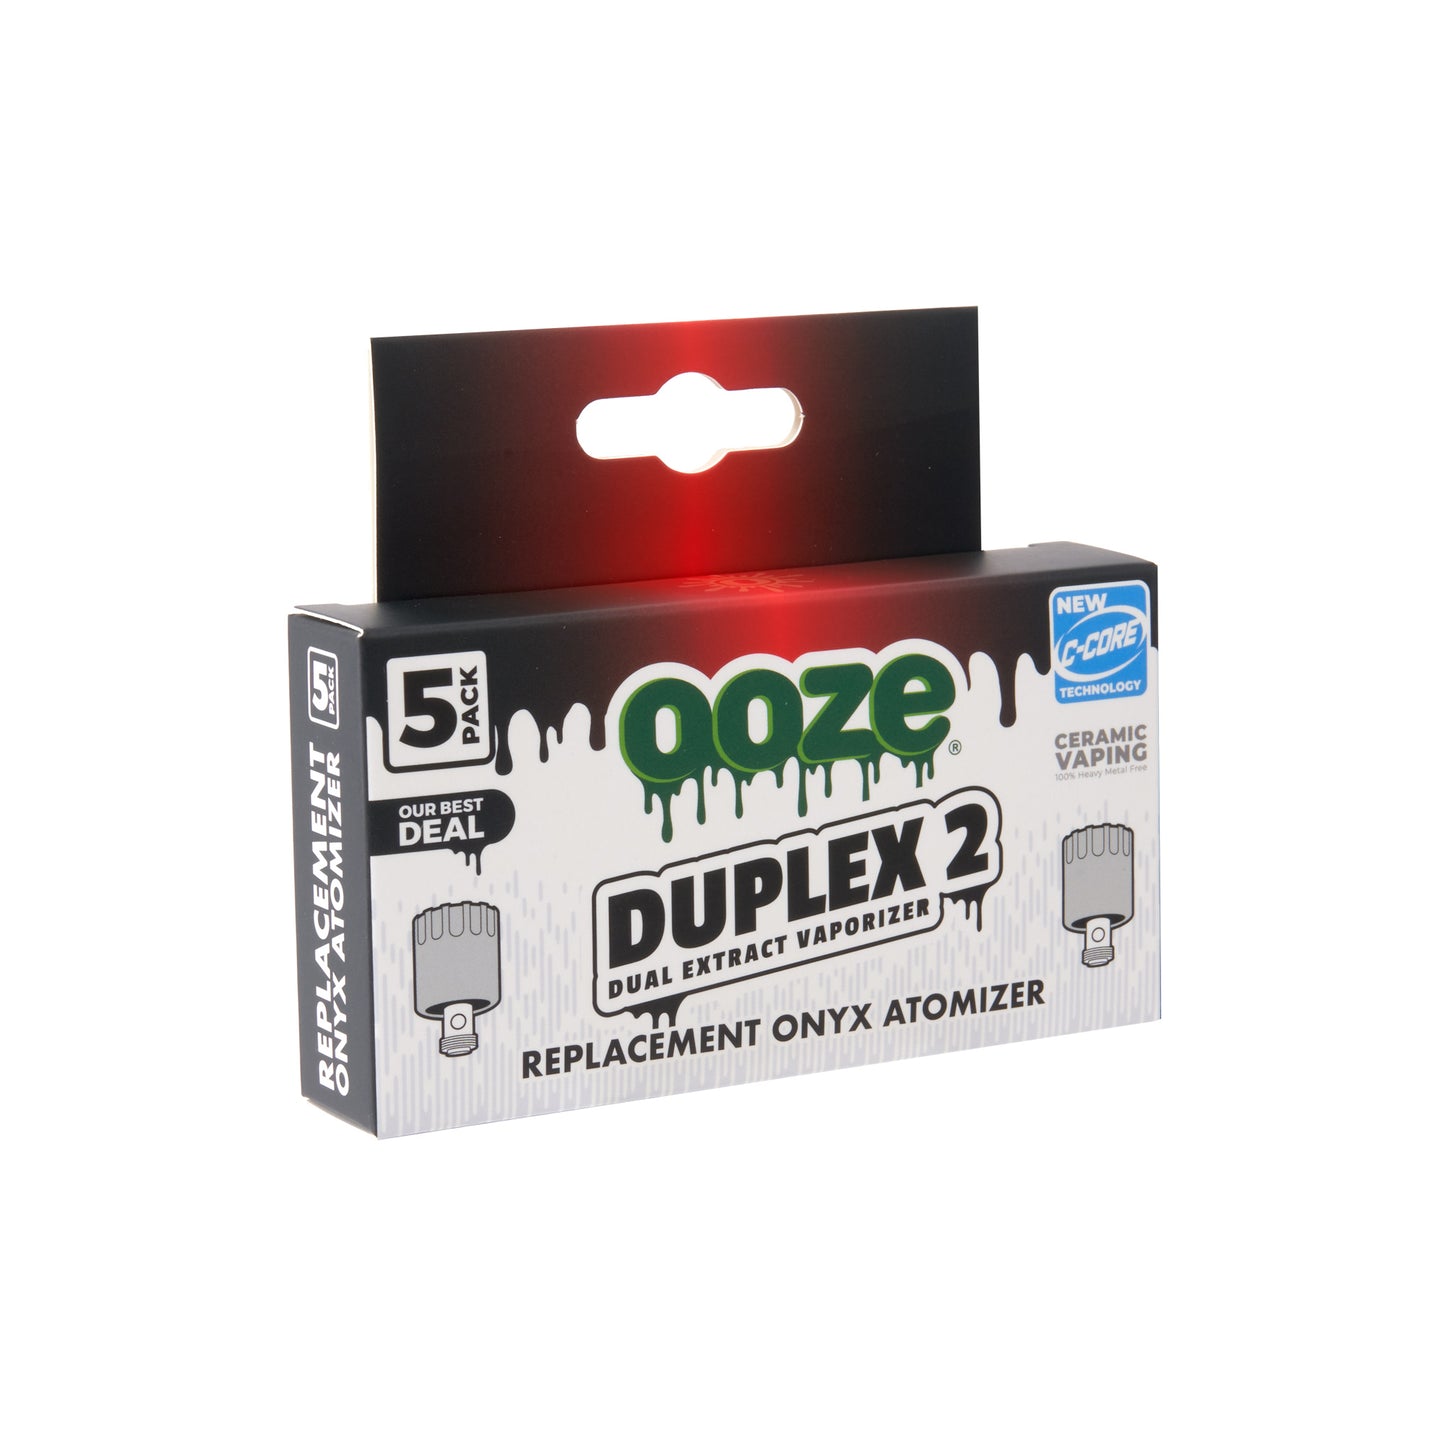 Duplex 2 Replacement Onyx Atomizer 5-Pack